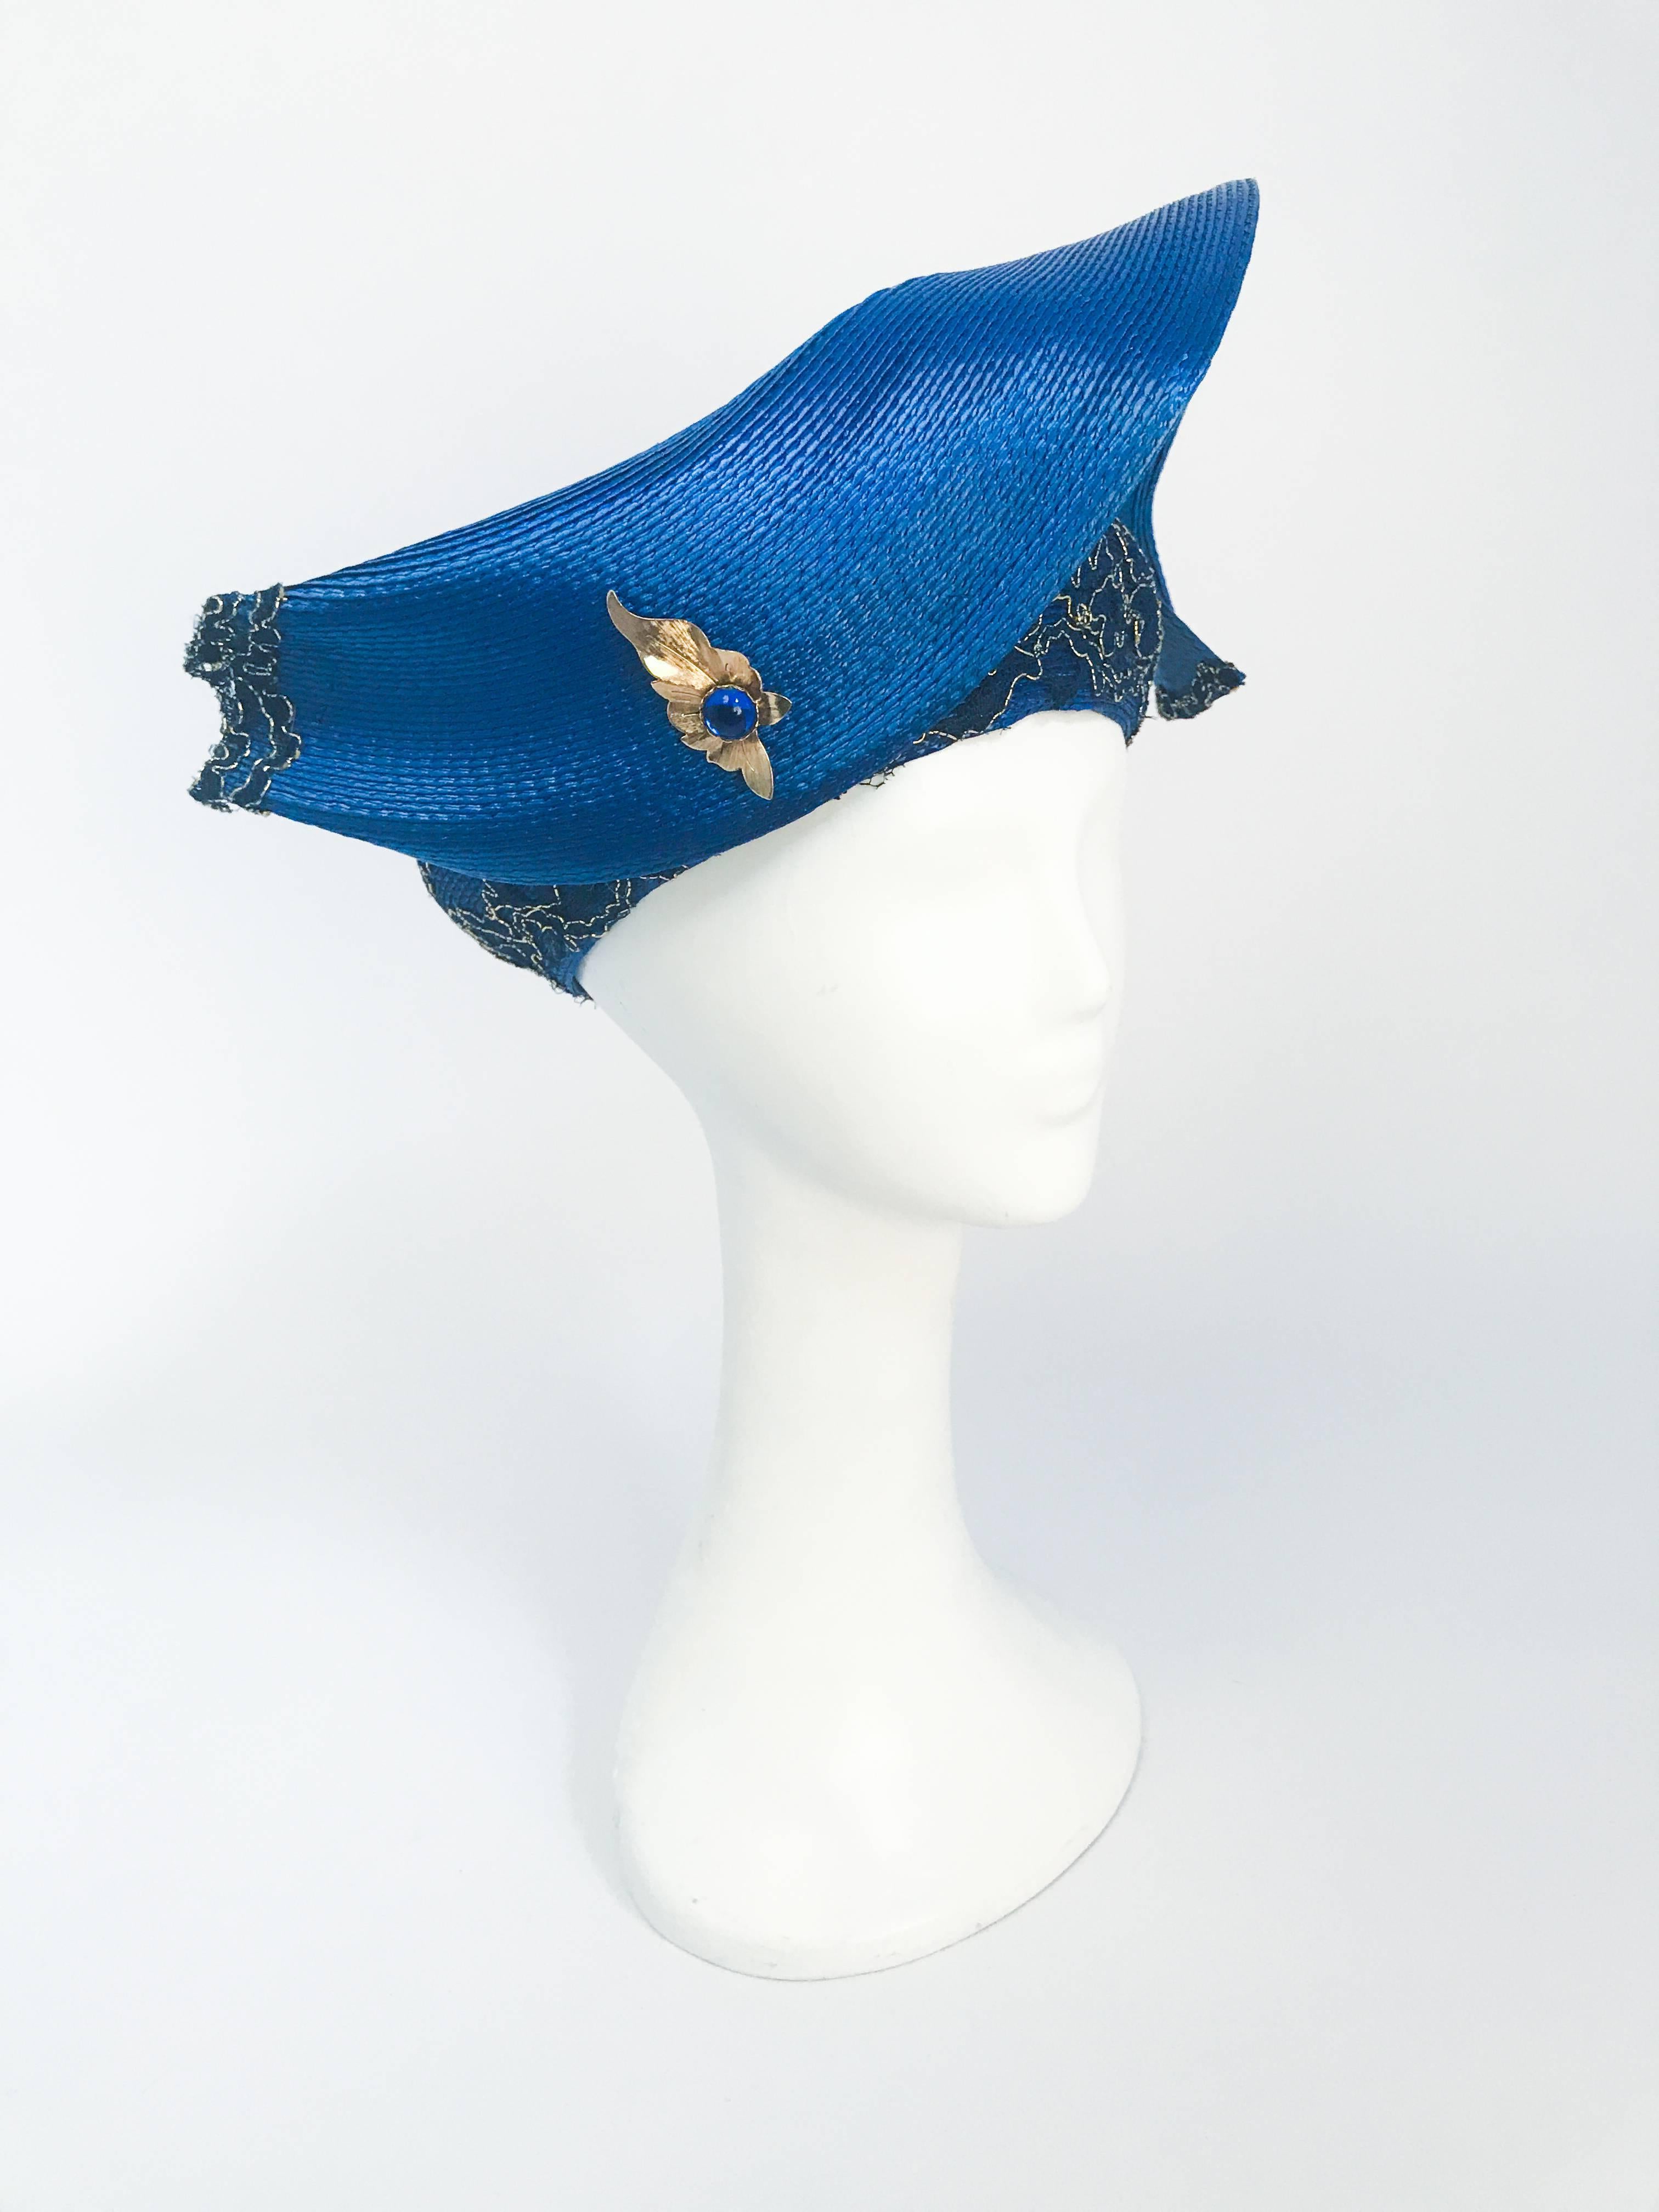 1980s Blue and Gold-tone Structured Hat. Blue woven hat with structured accent and gold-tone and lace embellishment. 21+ inch circumference (size small).